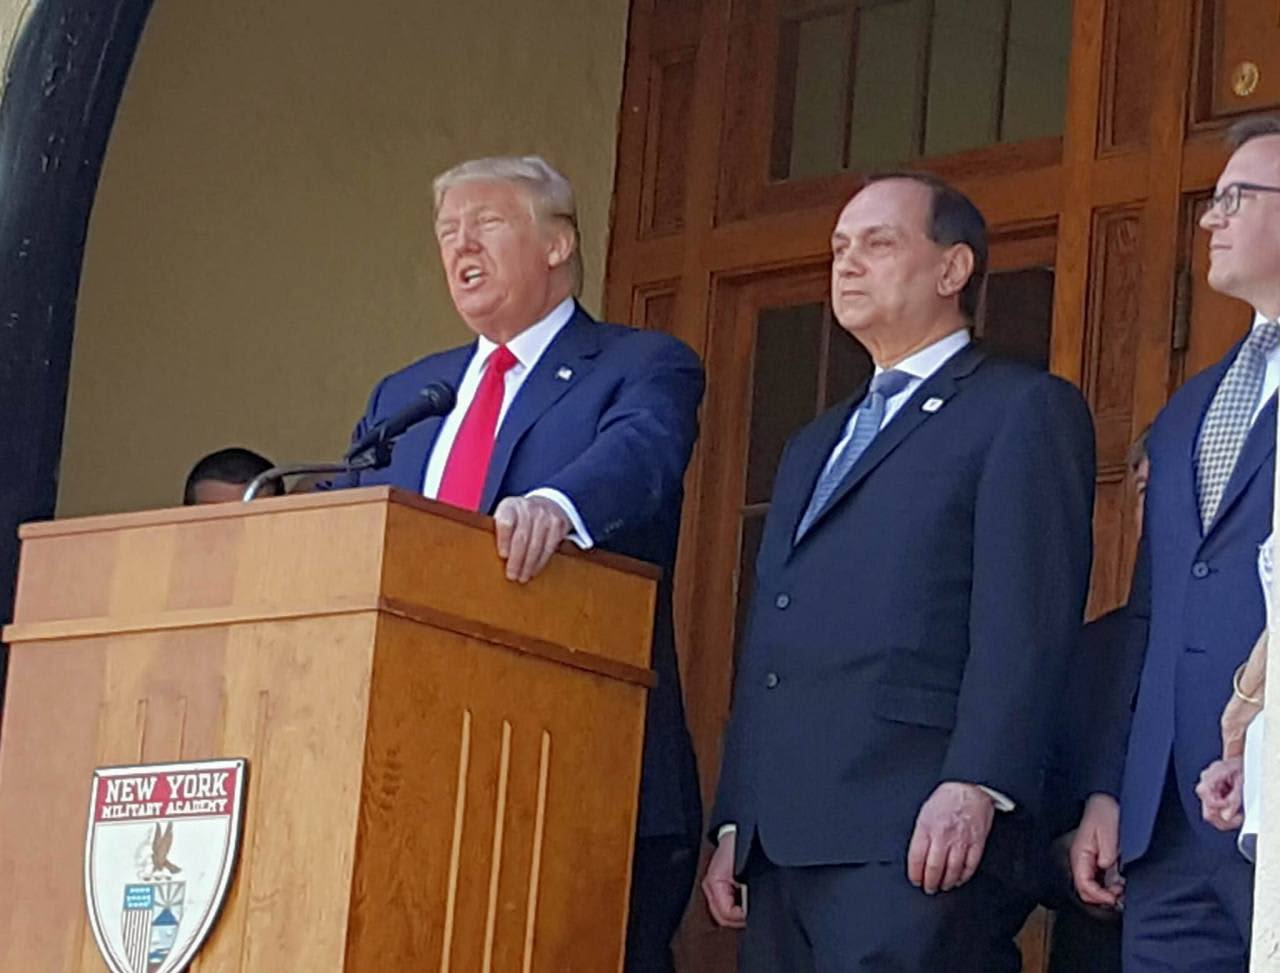 Donald Trump at a recent talk at New York Military Academy in Cornwall.